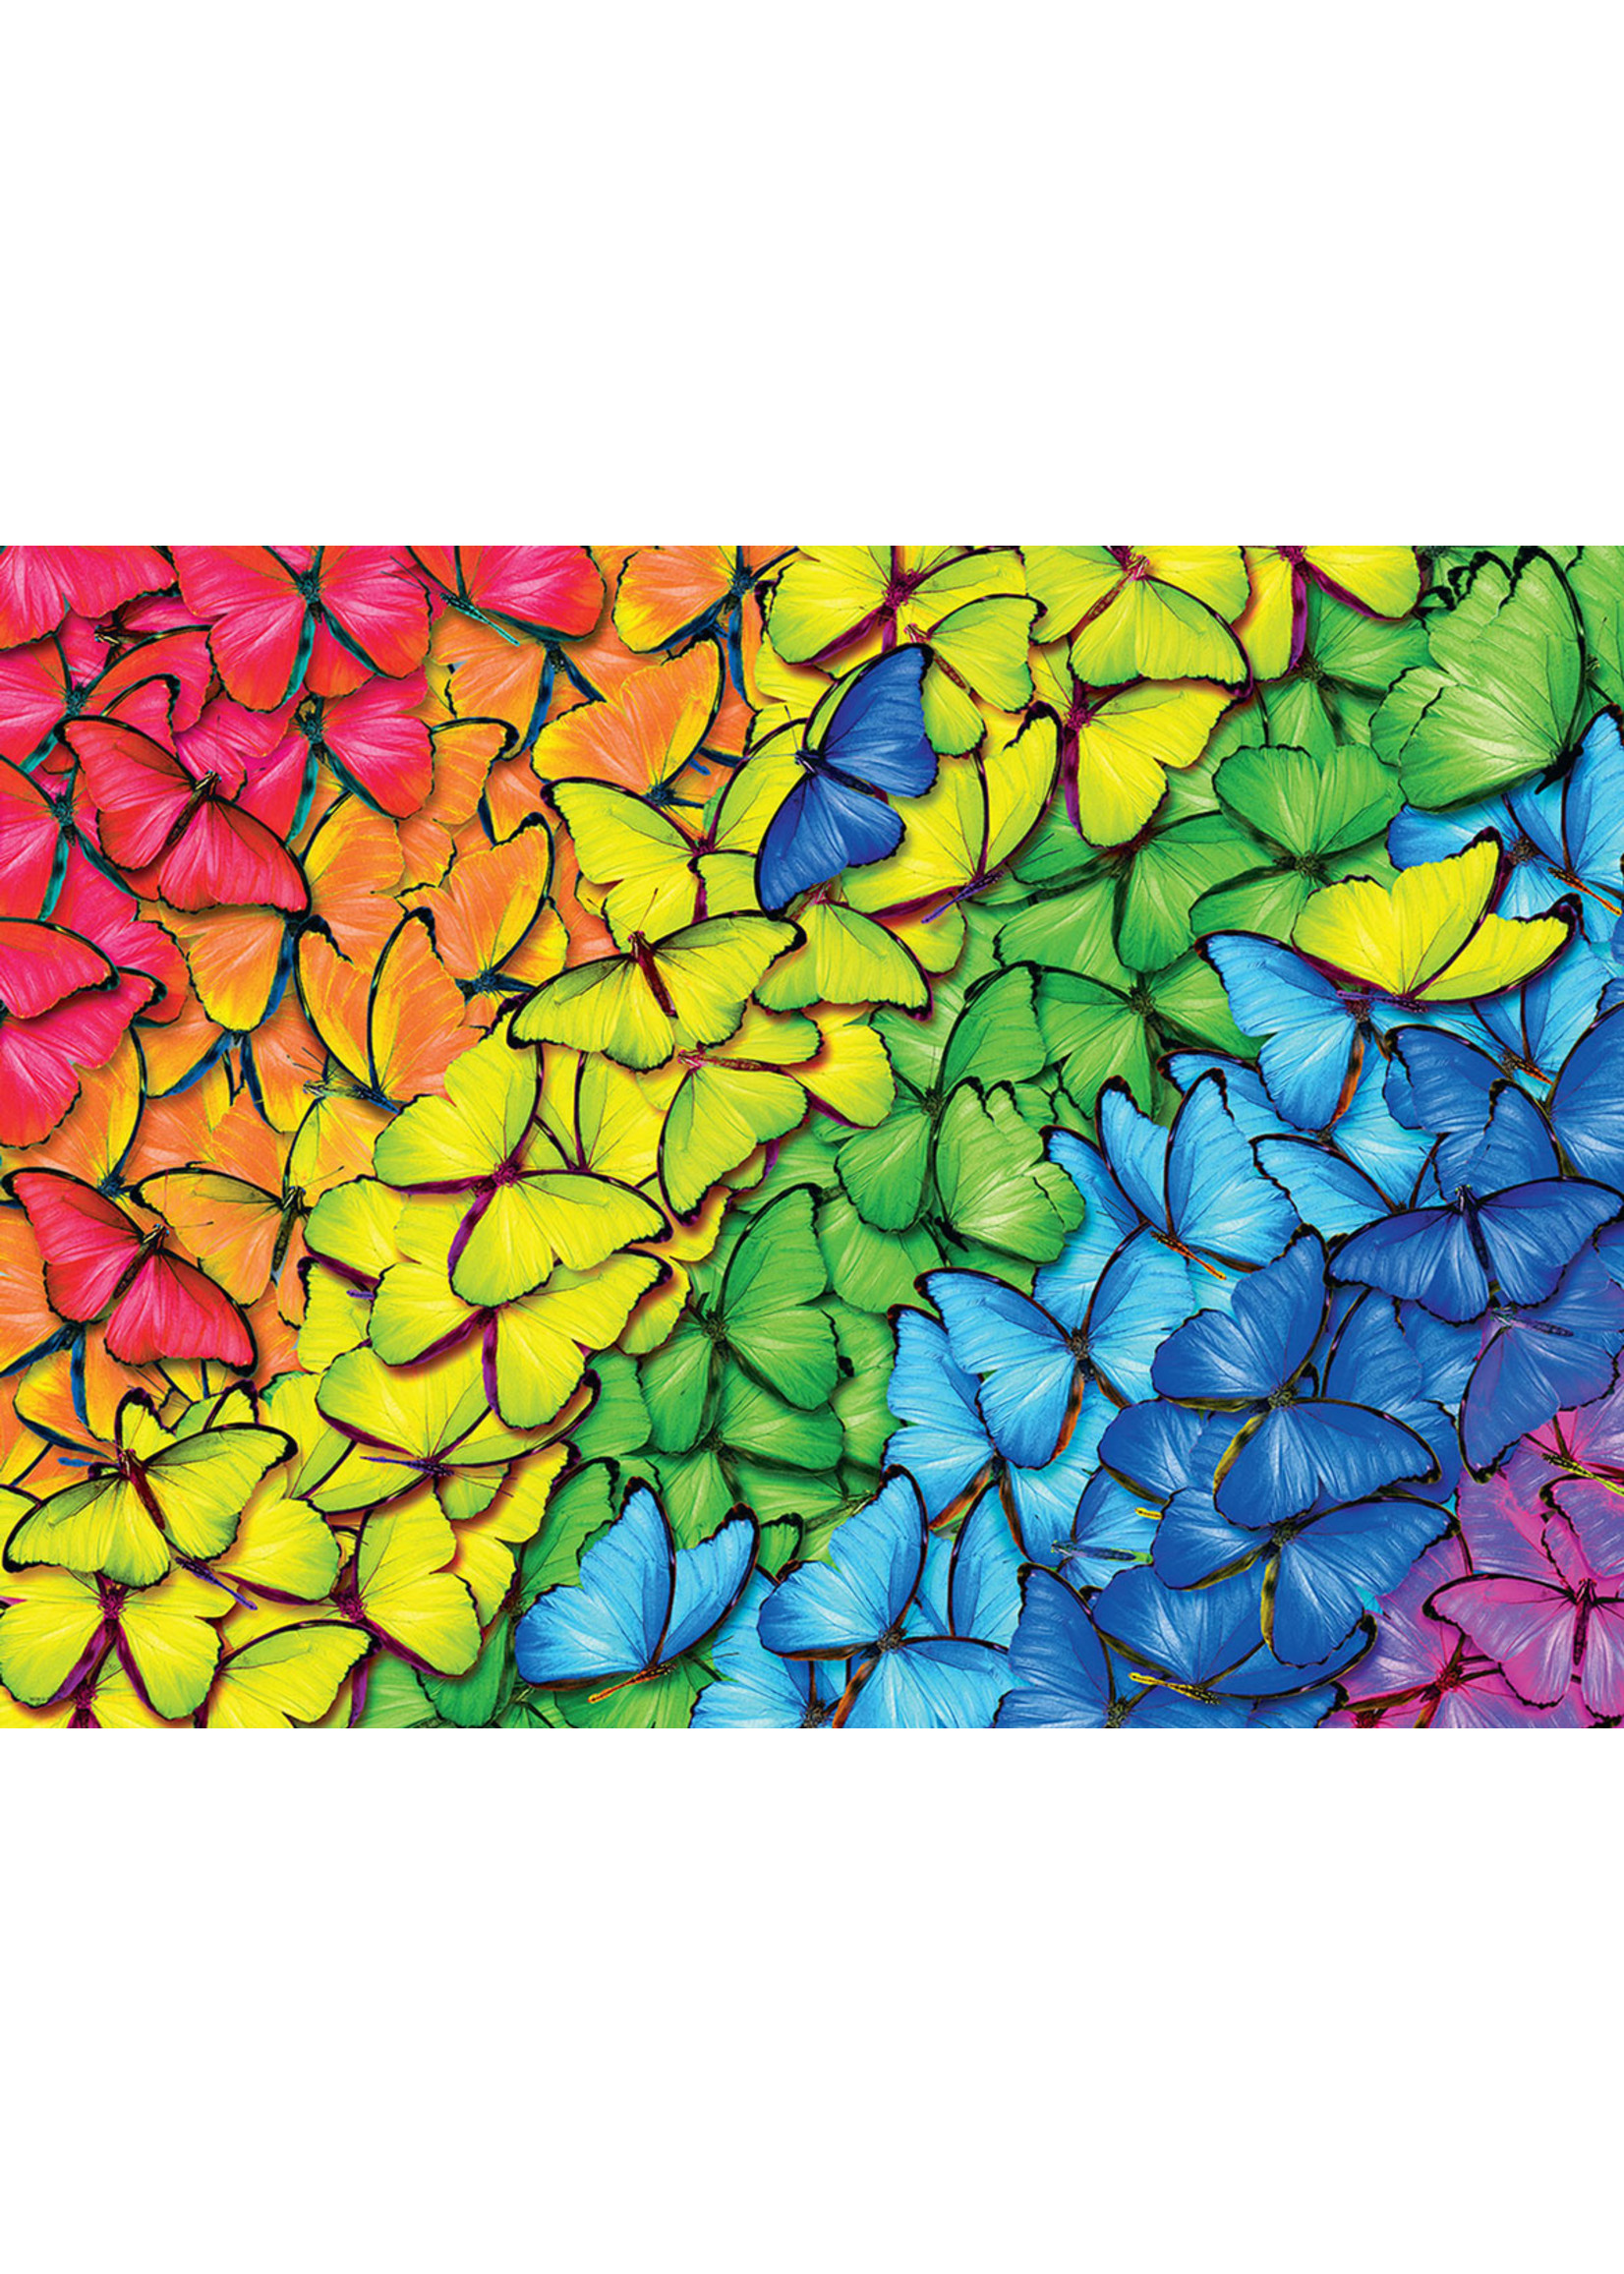 Eurographics "Butterfly Rainbow" 1000 Piece Puzzle